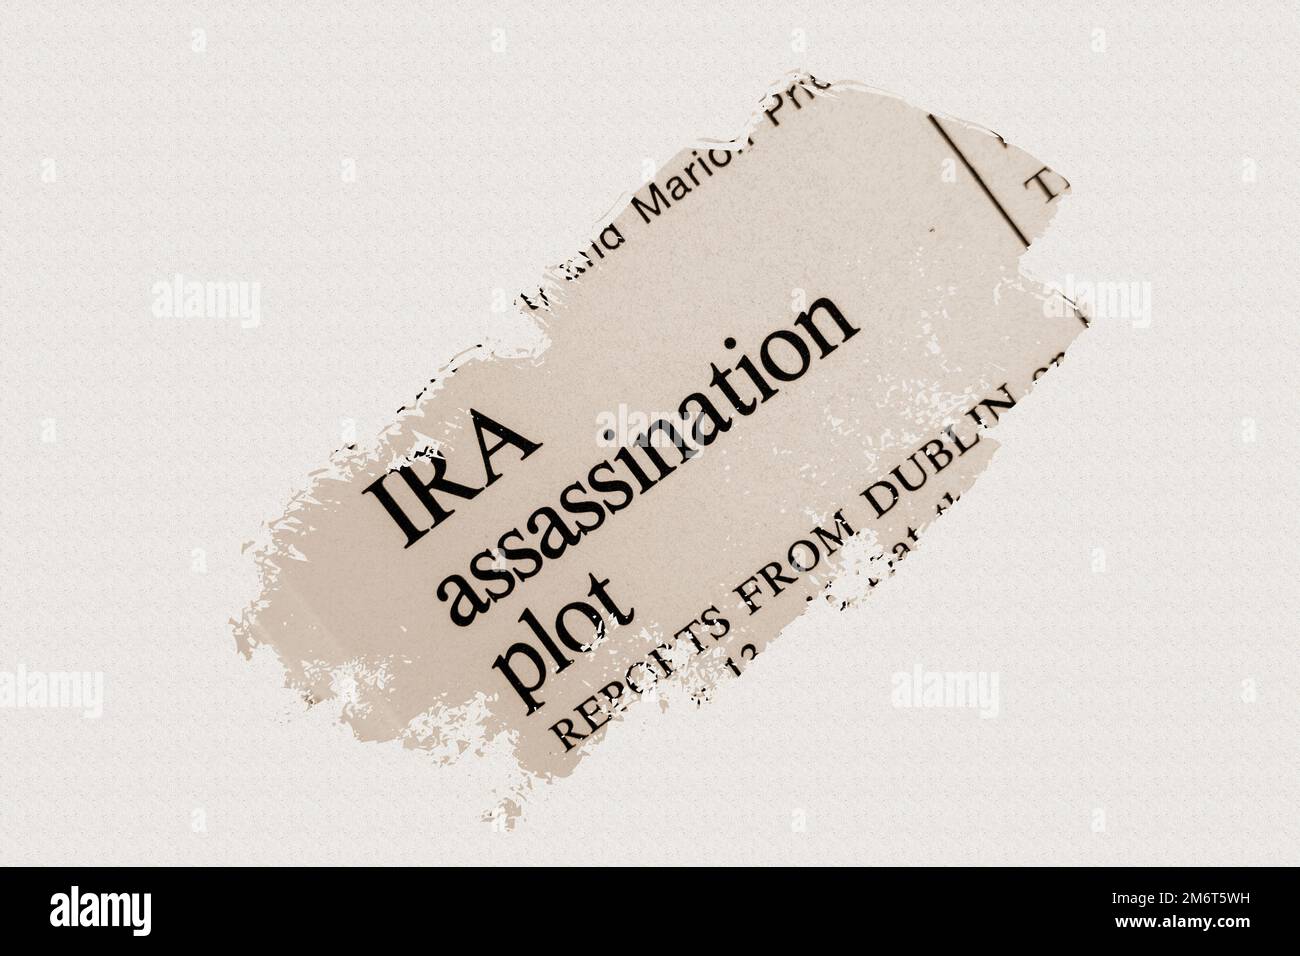 news story from 1975 newspaper headline article title - IRA assassination plot in sepia Stock Photo